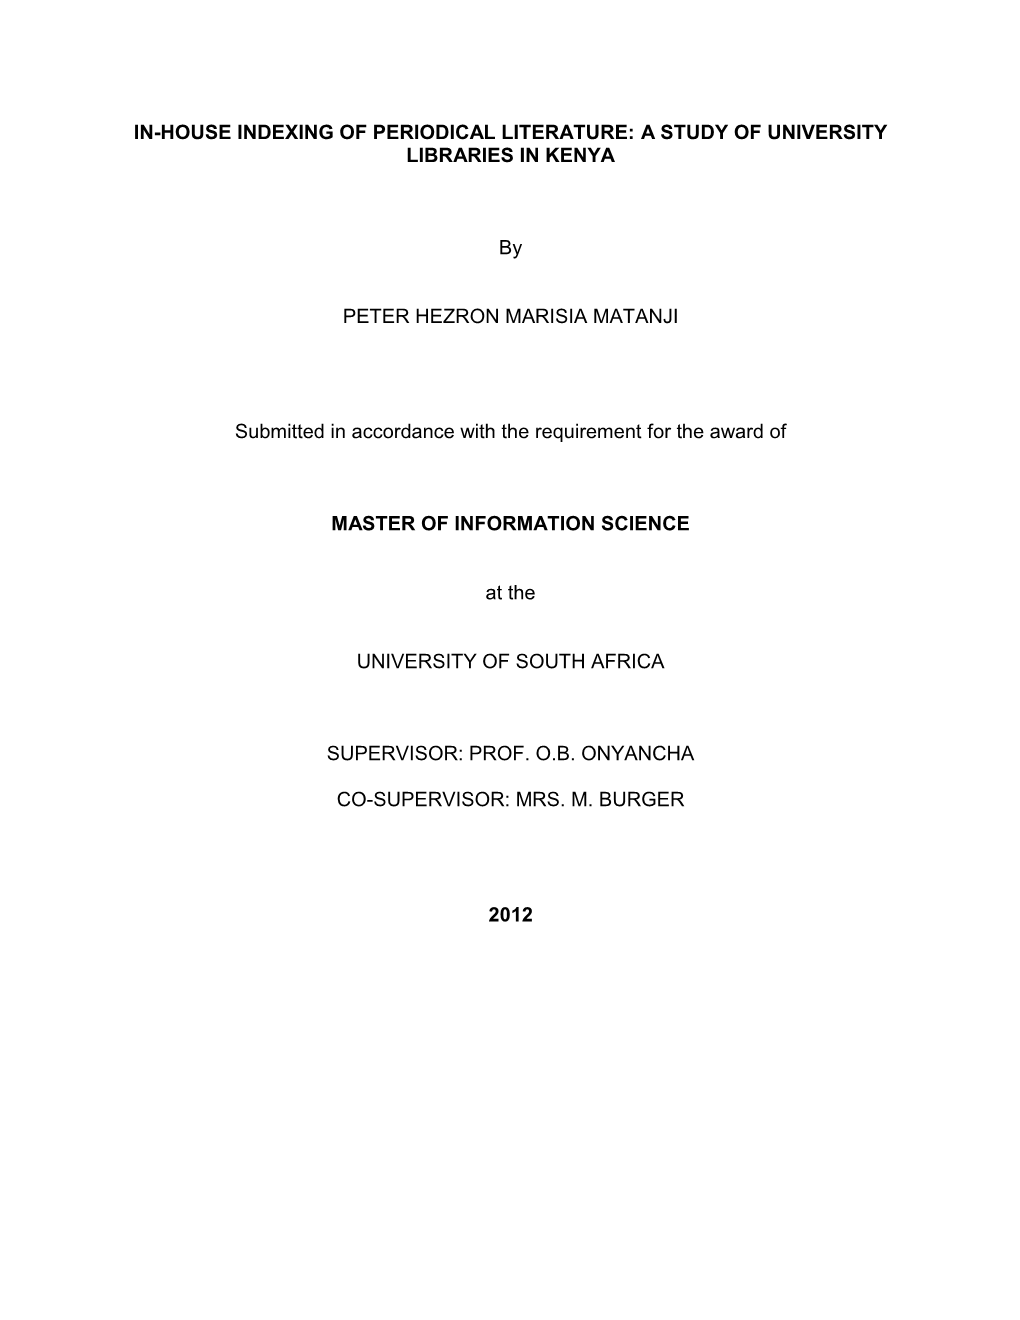 In-House Indexing of Periodical Literature: a Study of University Libraries in Kenya